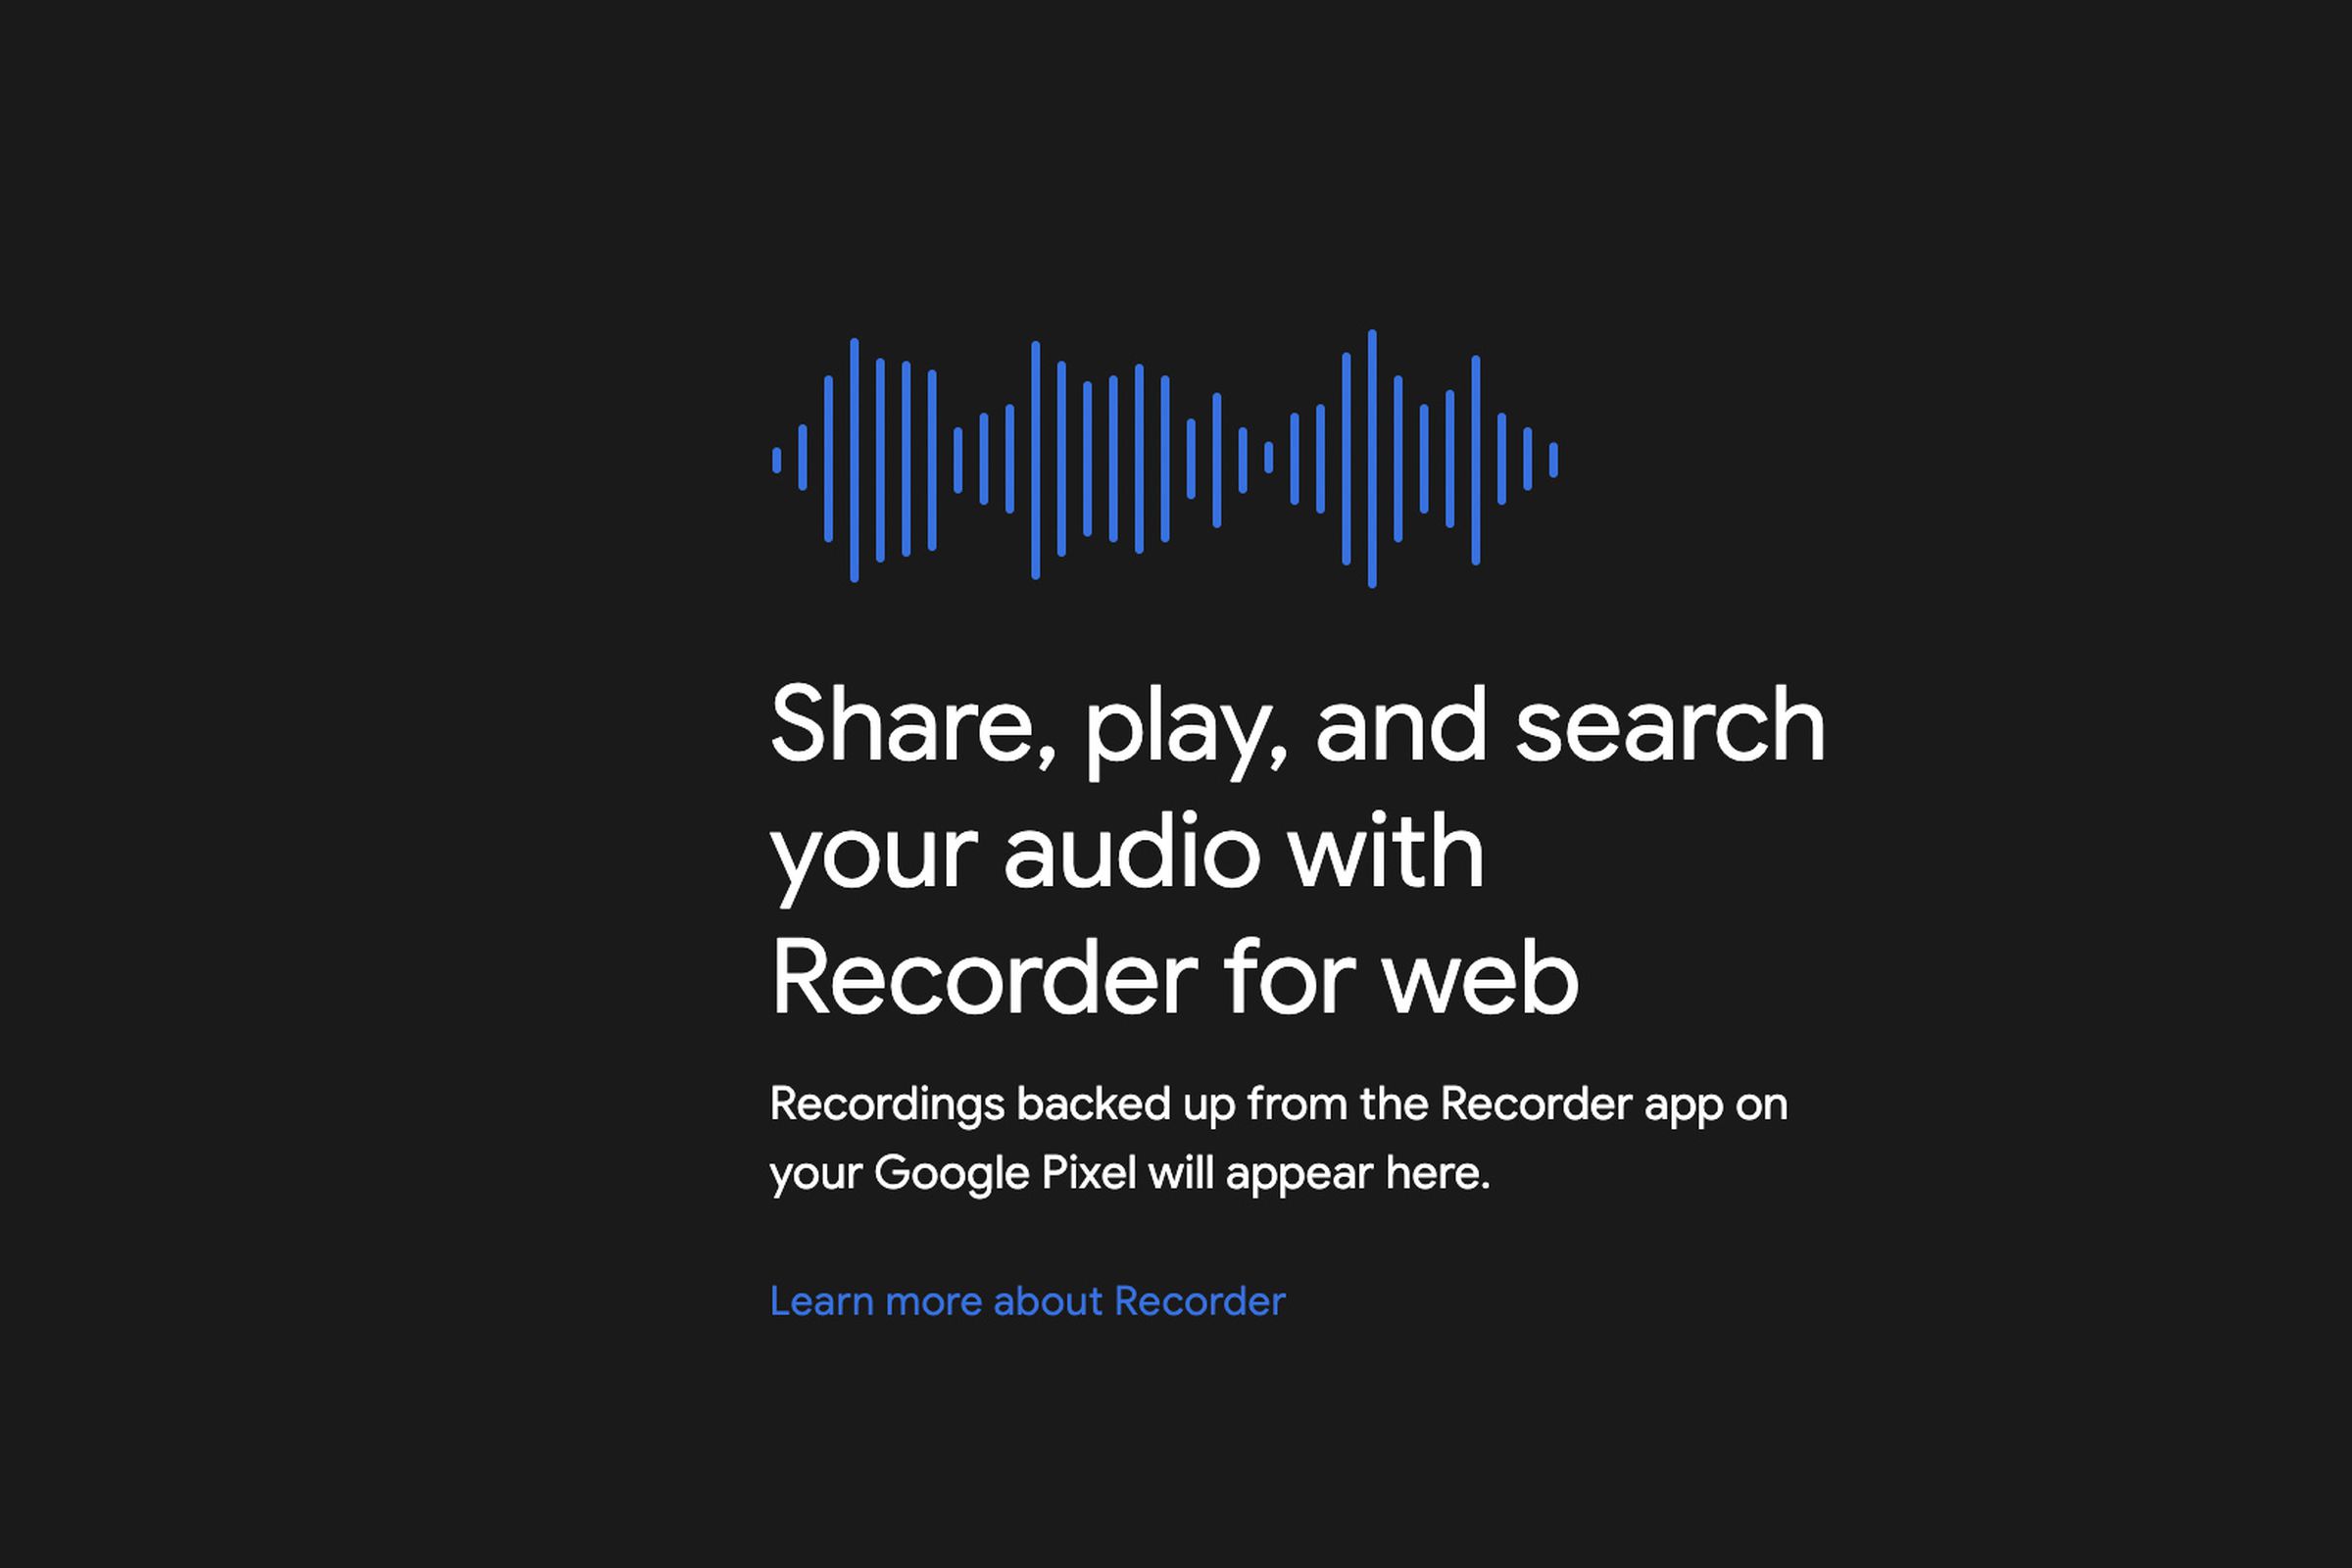 Pixel owners can now access backups and share their recordings on the web.